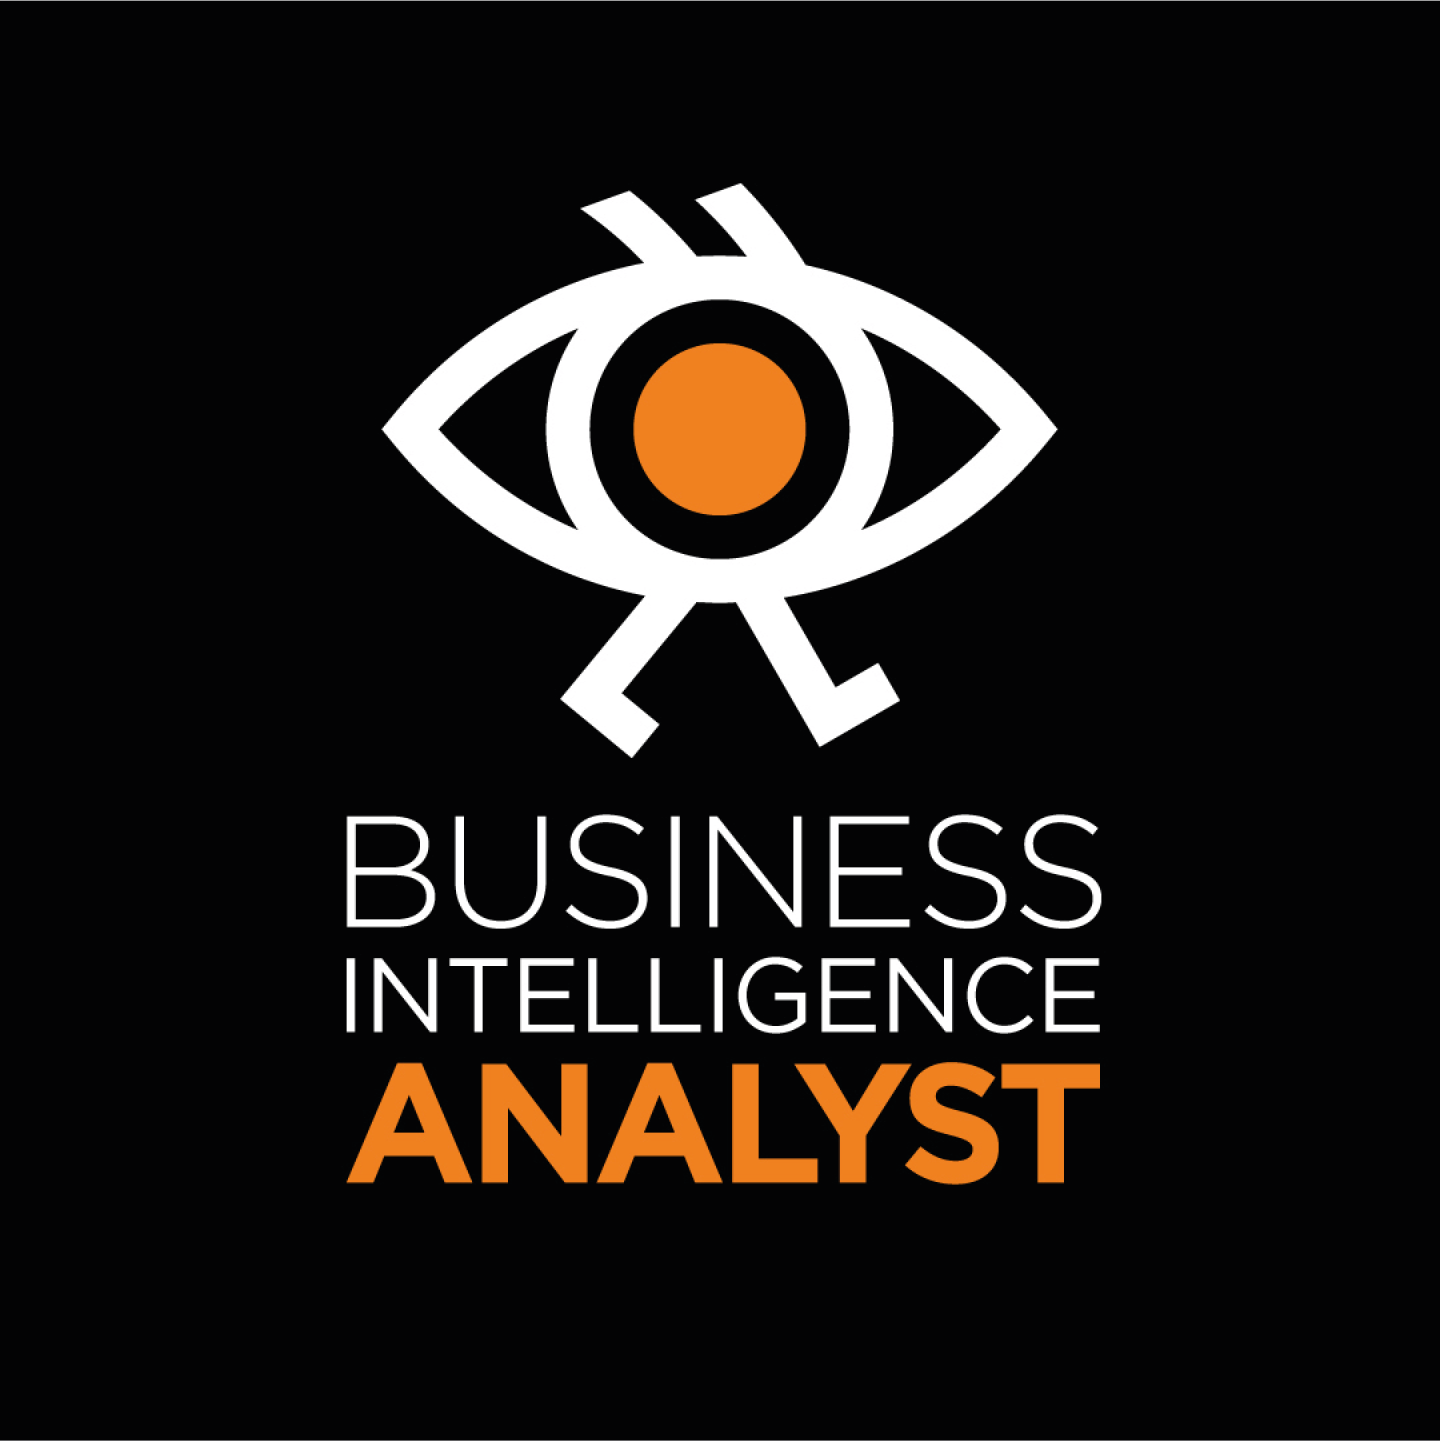 We are looking for NEW BUSINESS INTELLIGENCE ANALYST